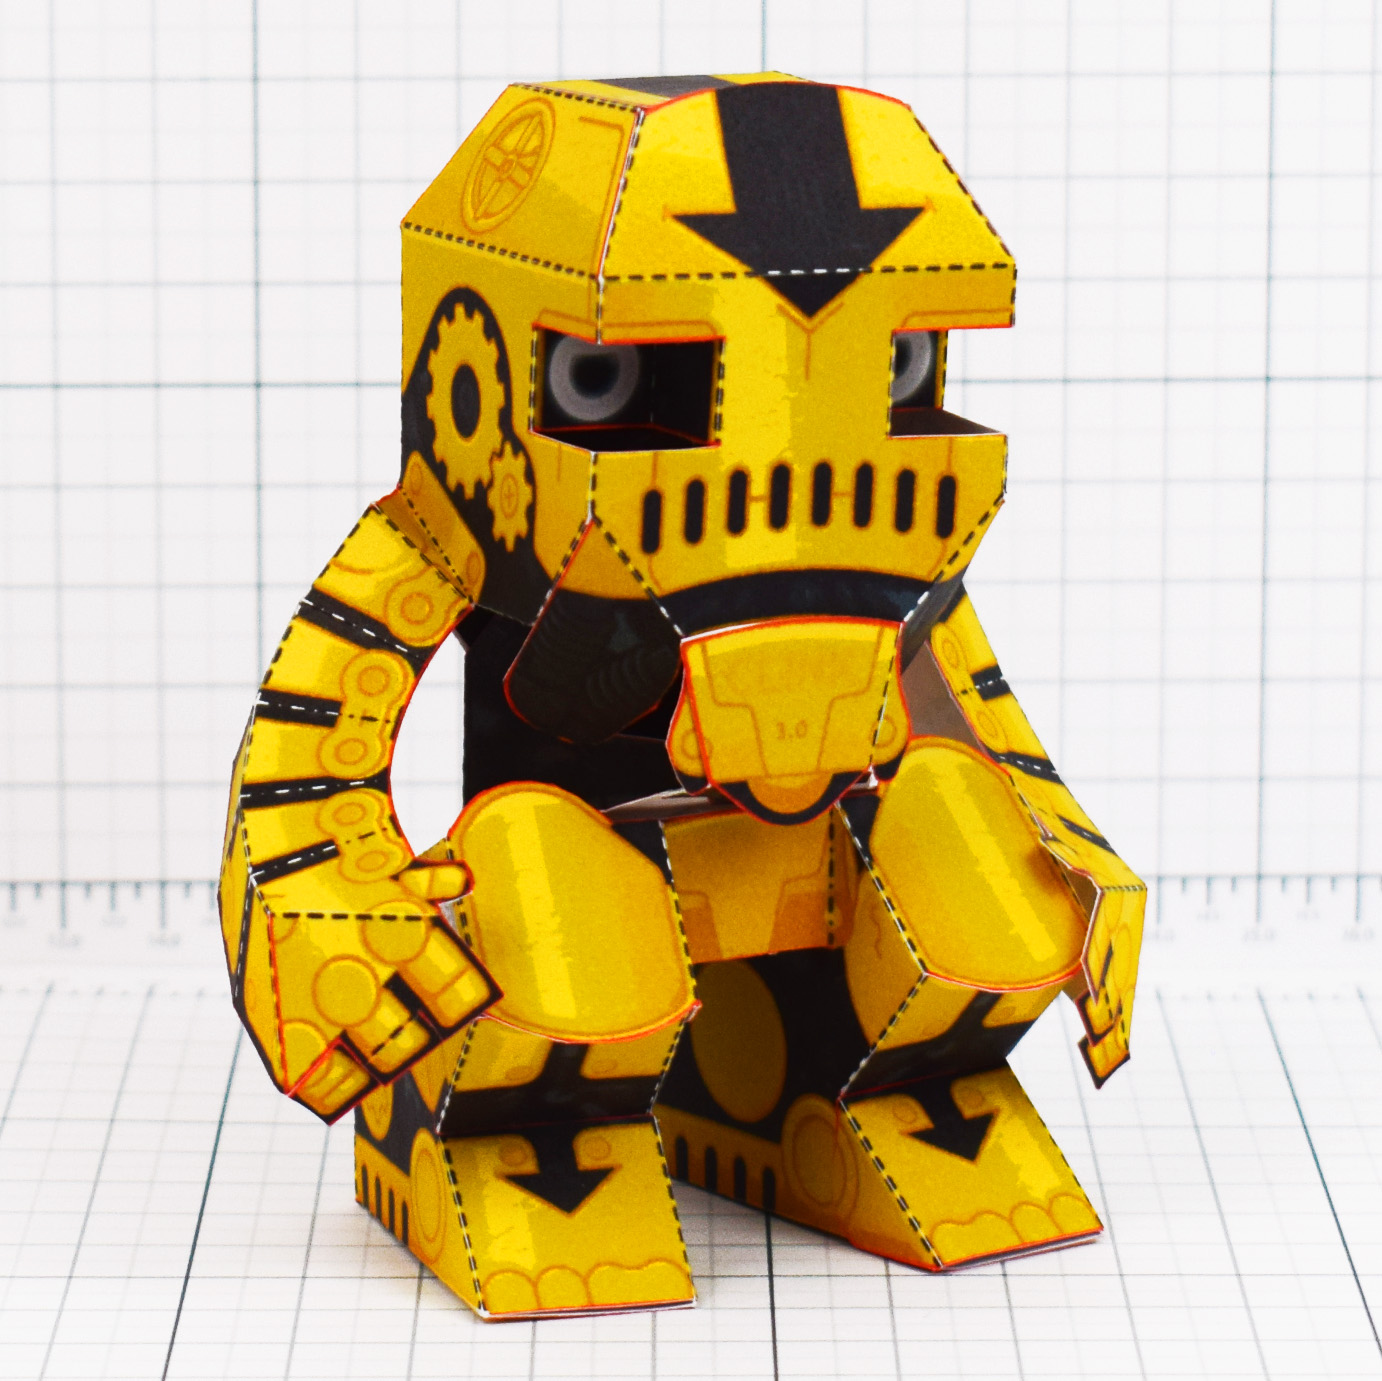 PTI - Clunk Fold Up Paper Toy Robot image - Main